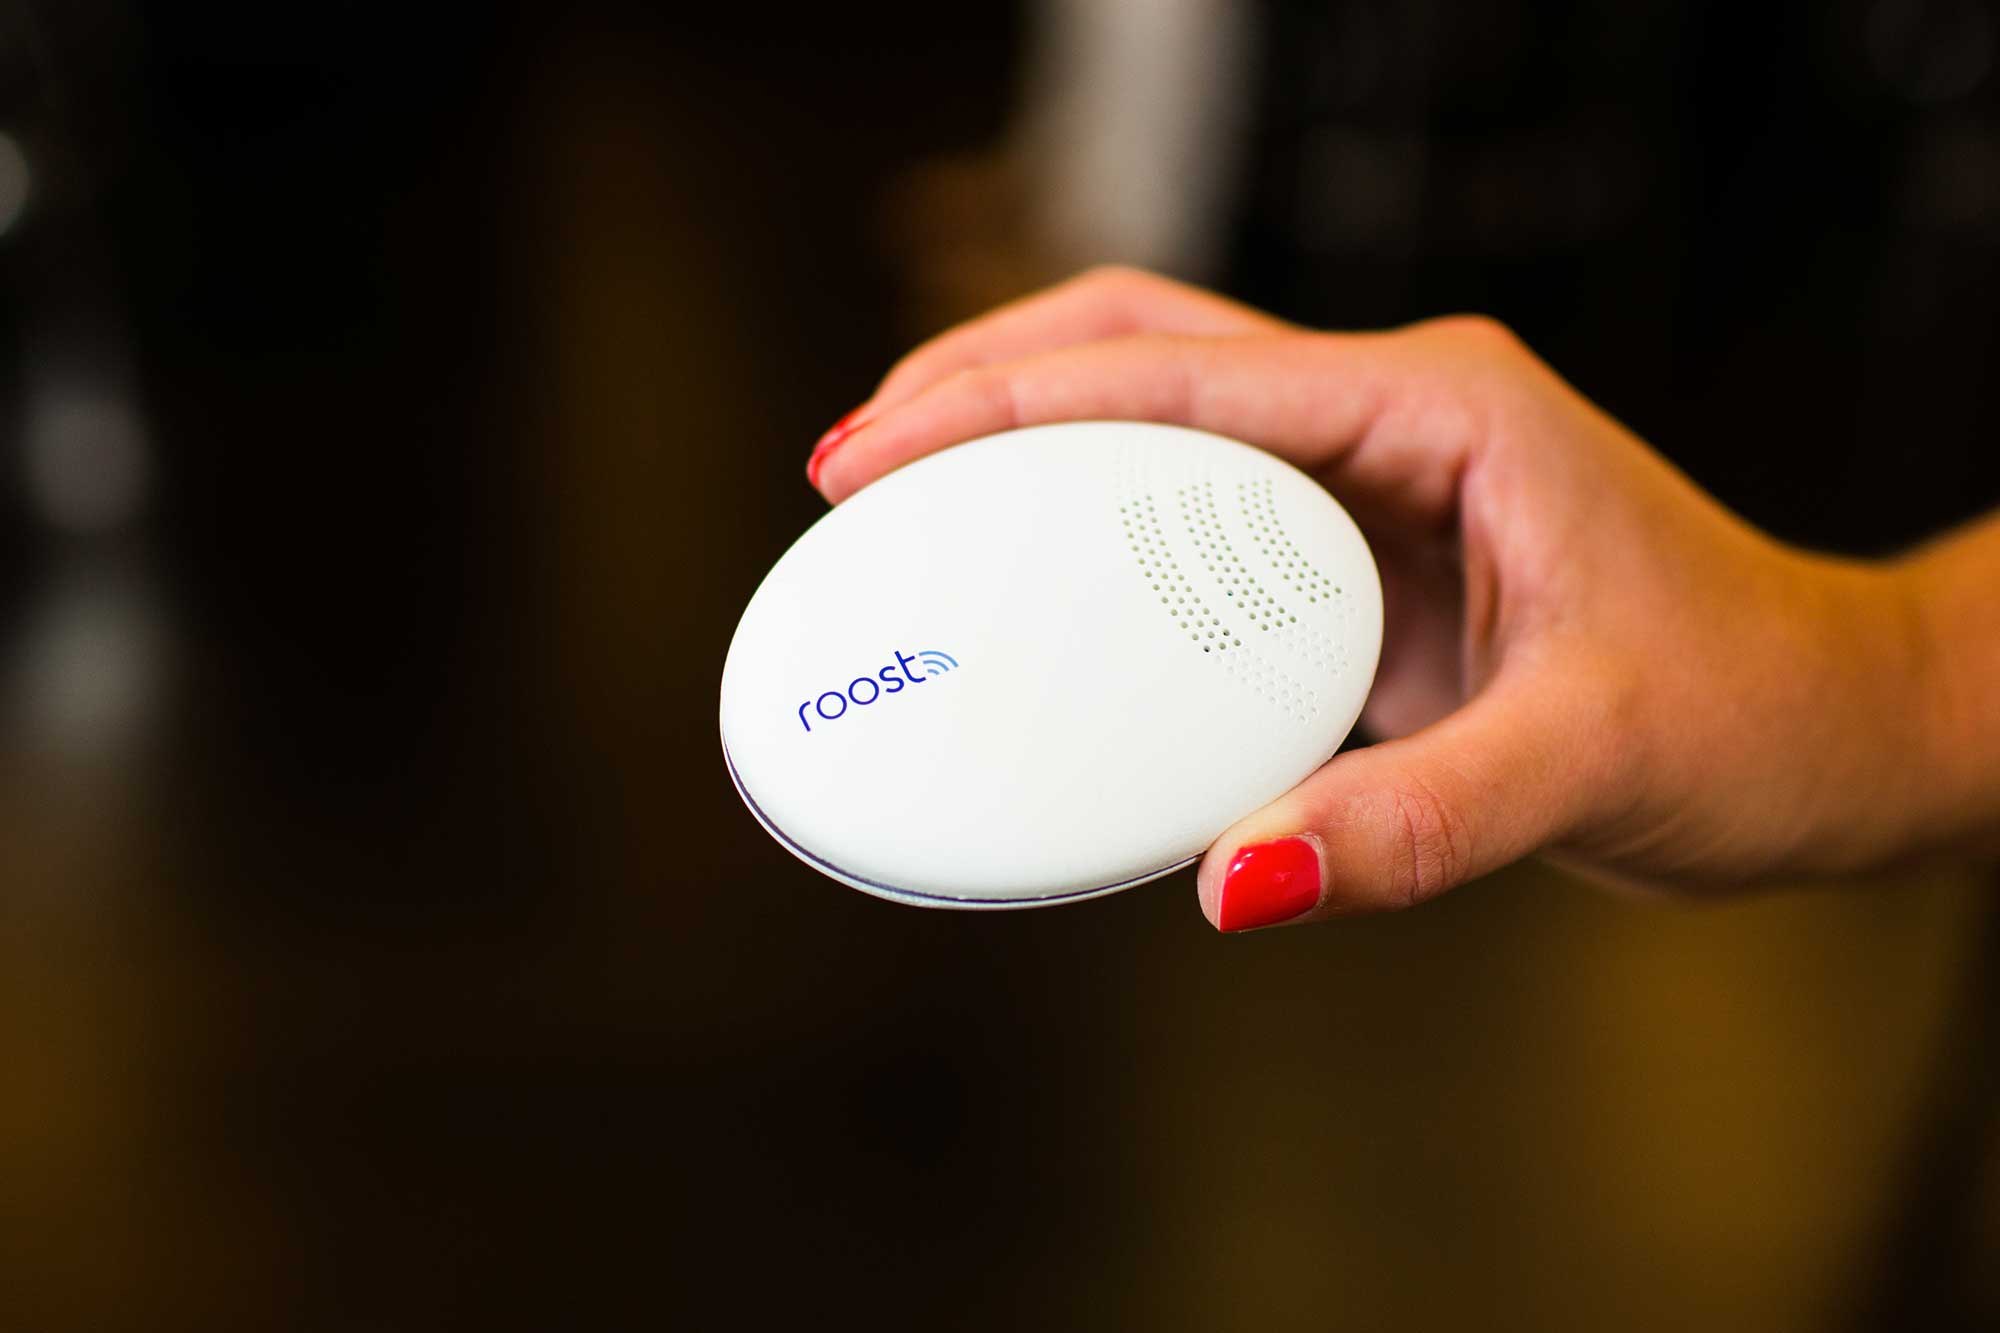 Introducing The Roost Smart Water And Freeze Detector Roost Home Telematics